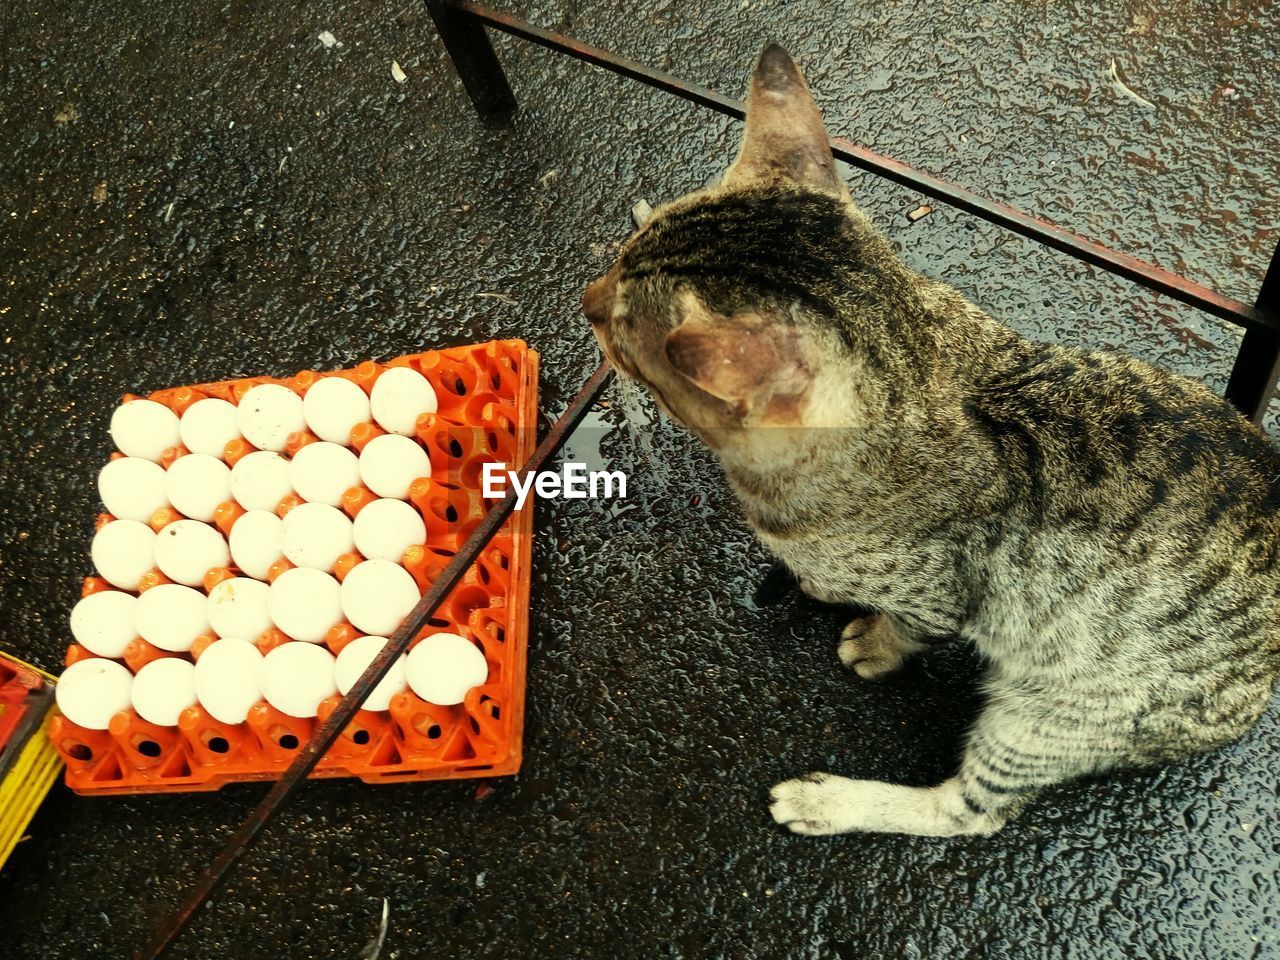 High angle view of cat sitting by egg carton on road